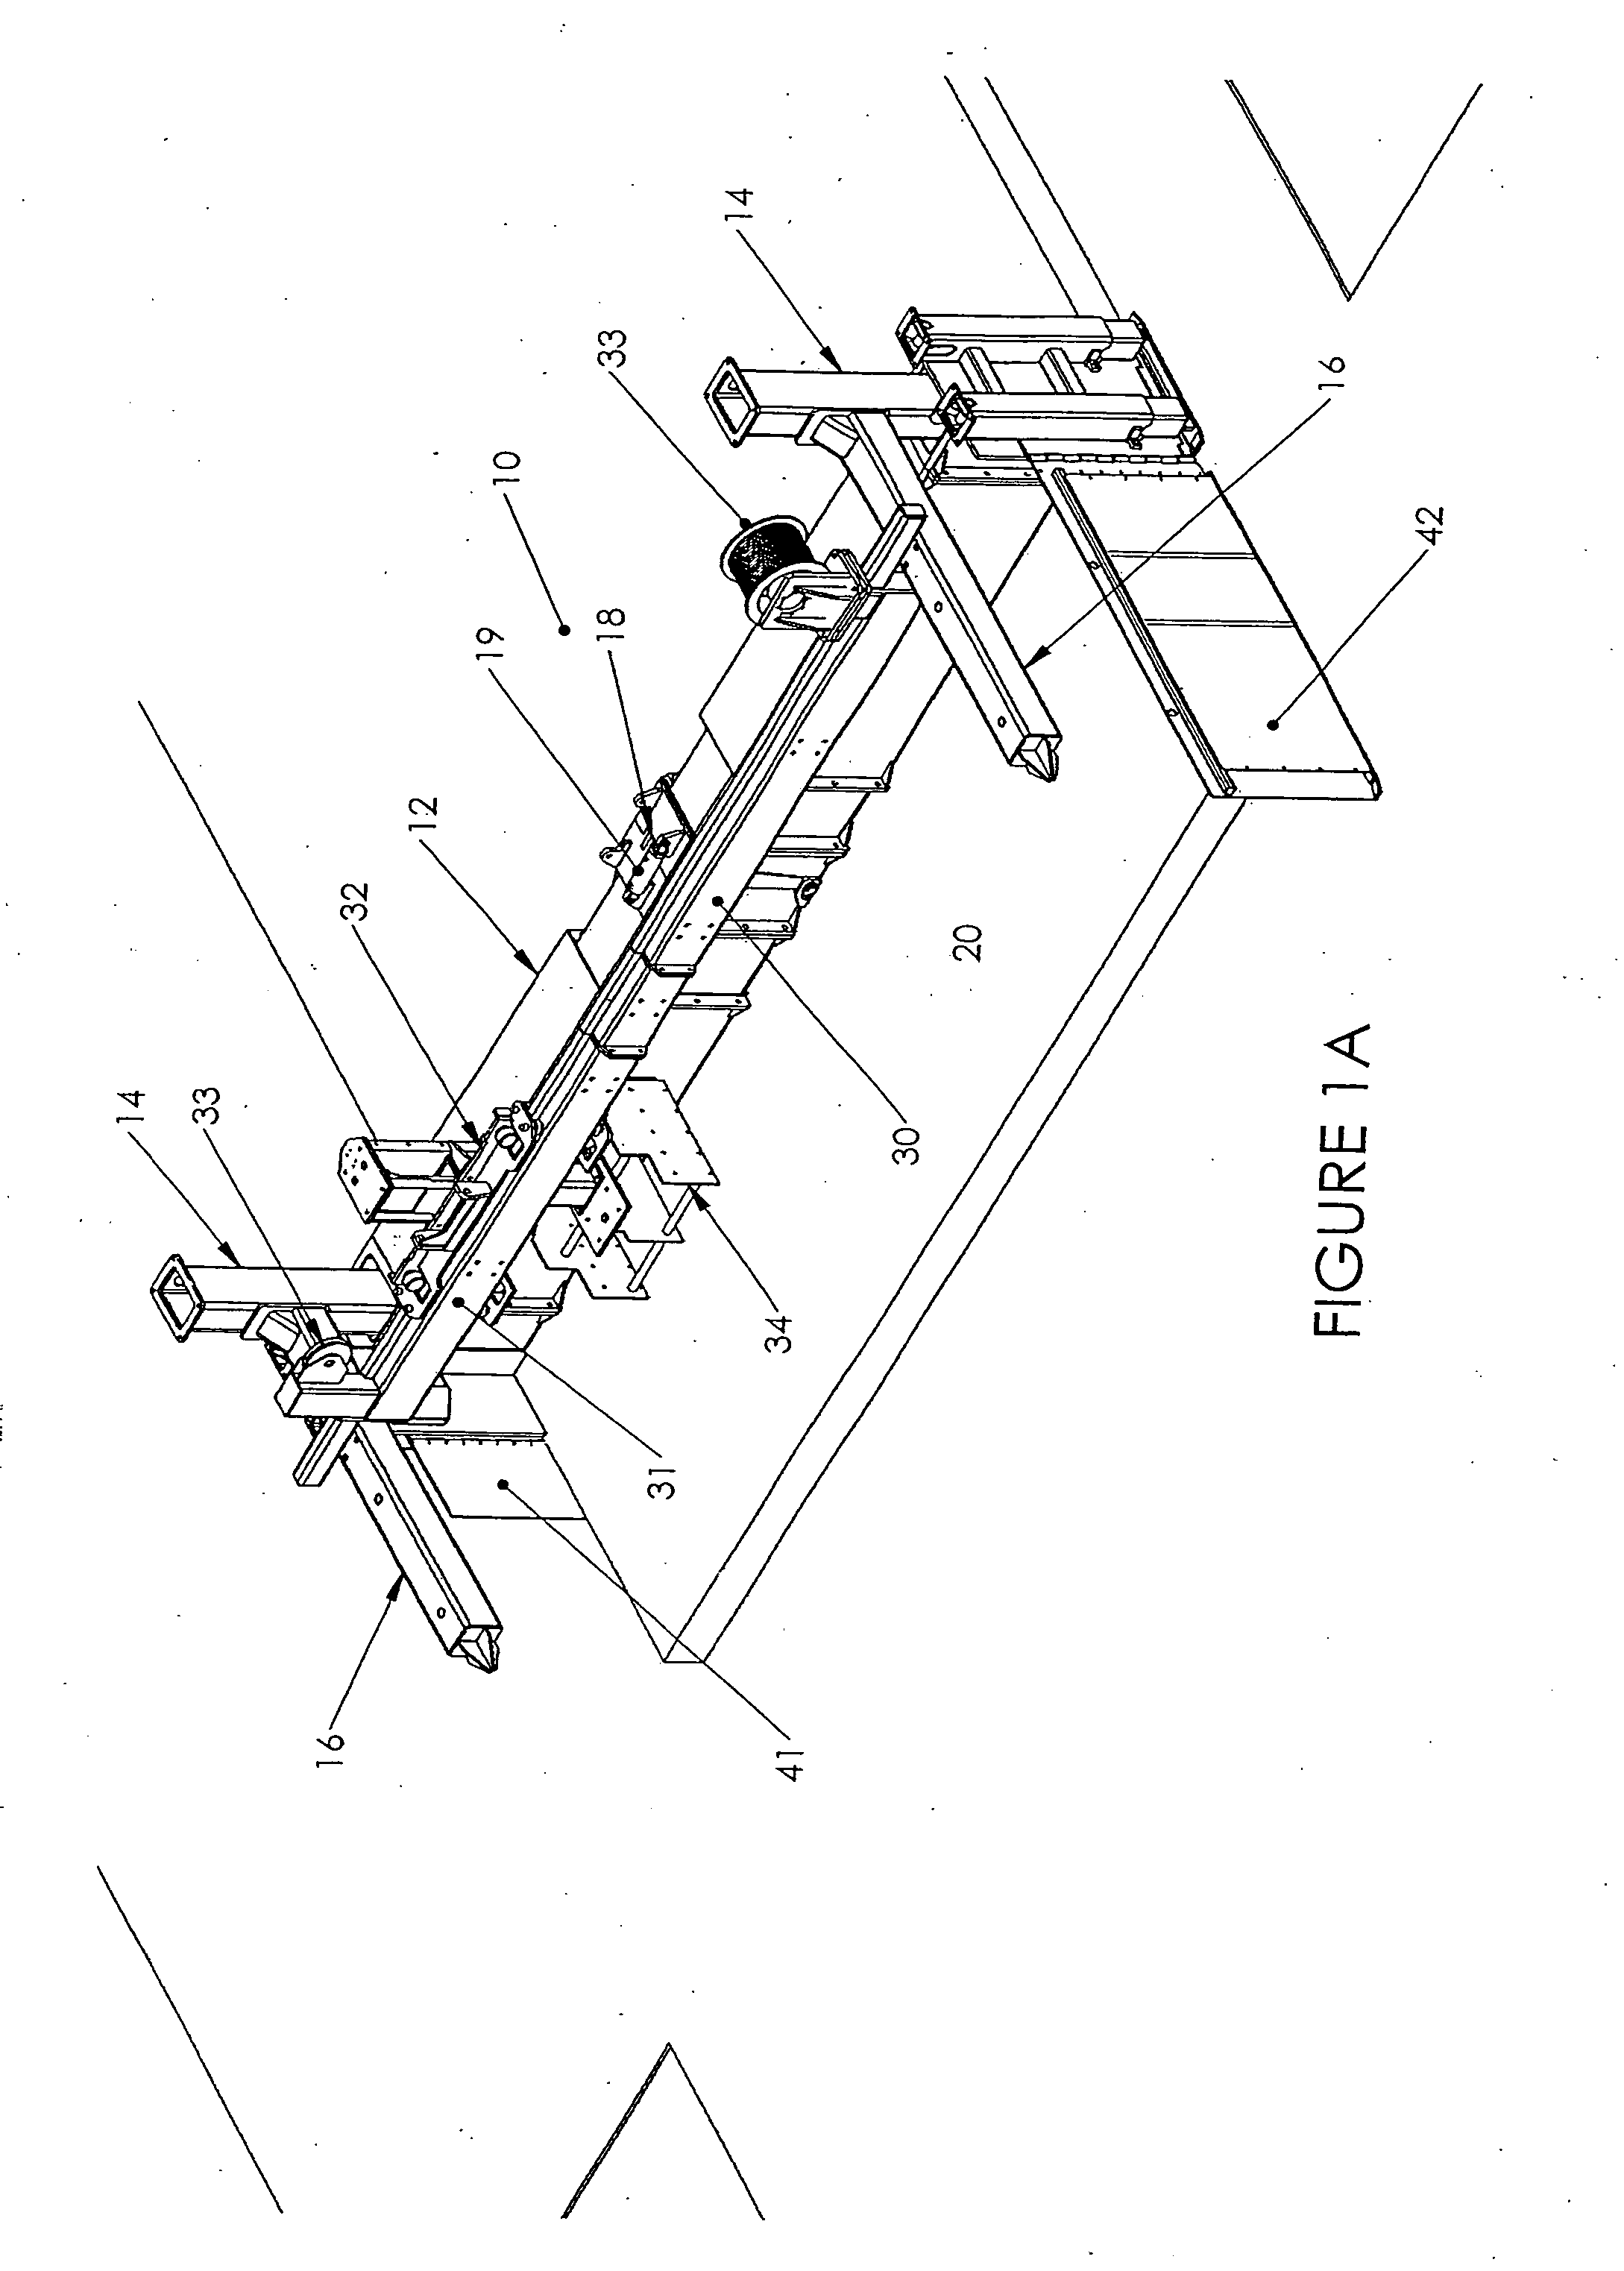 Strike off beam and spreader plow assembly for placer spreader